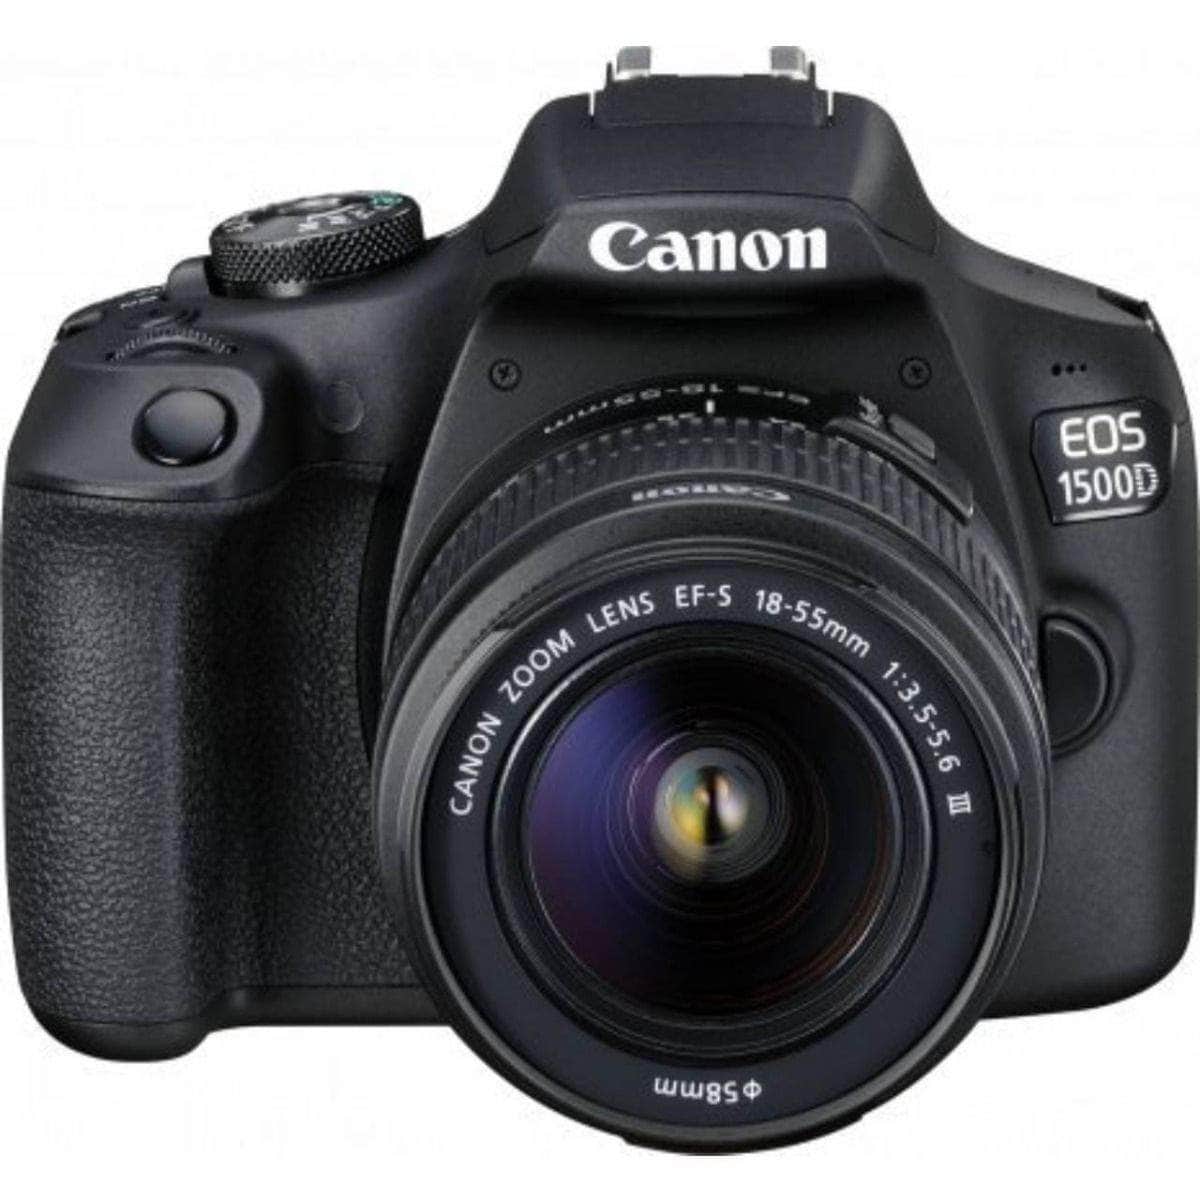 Canon EOS 1500D DSLR Camera with EFS 18-55mm III Lens Kit